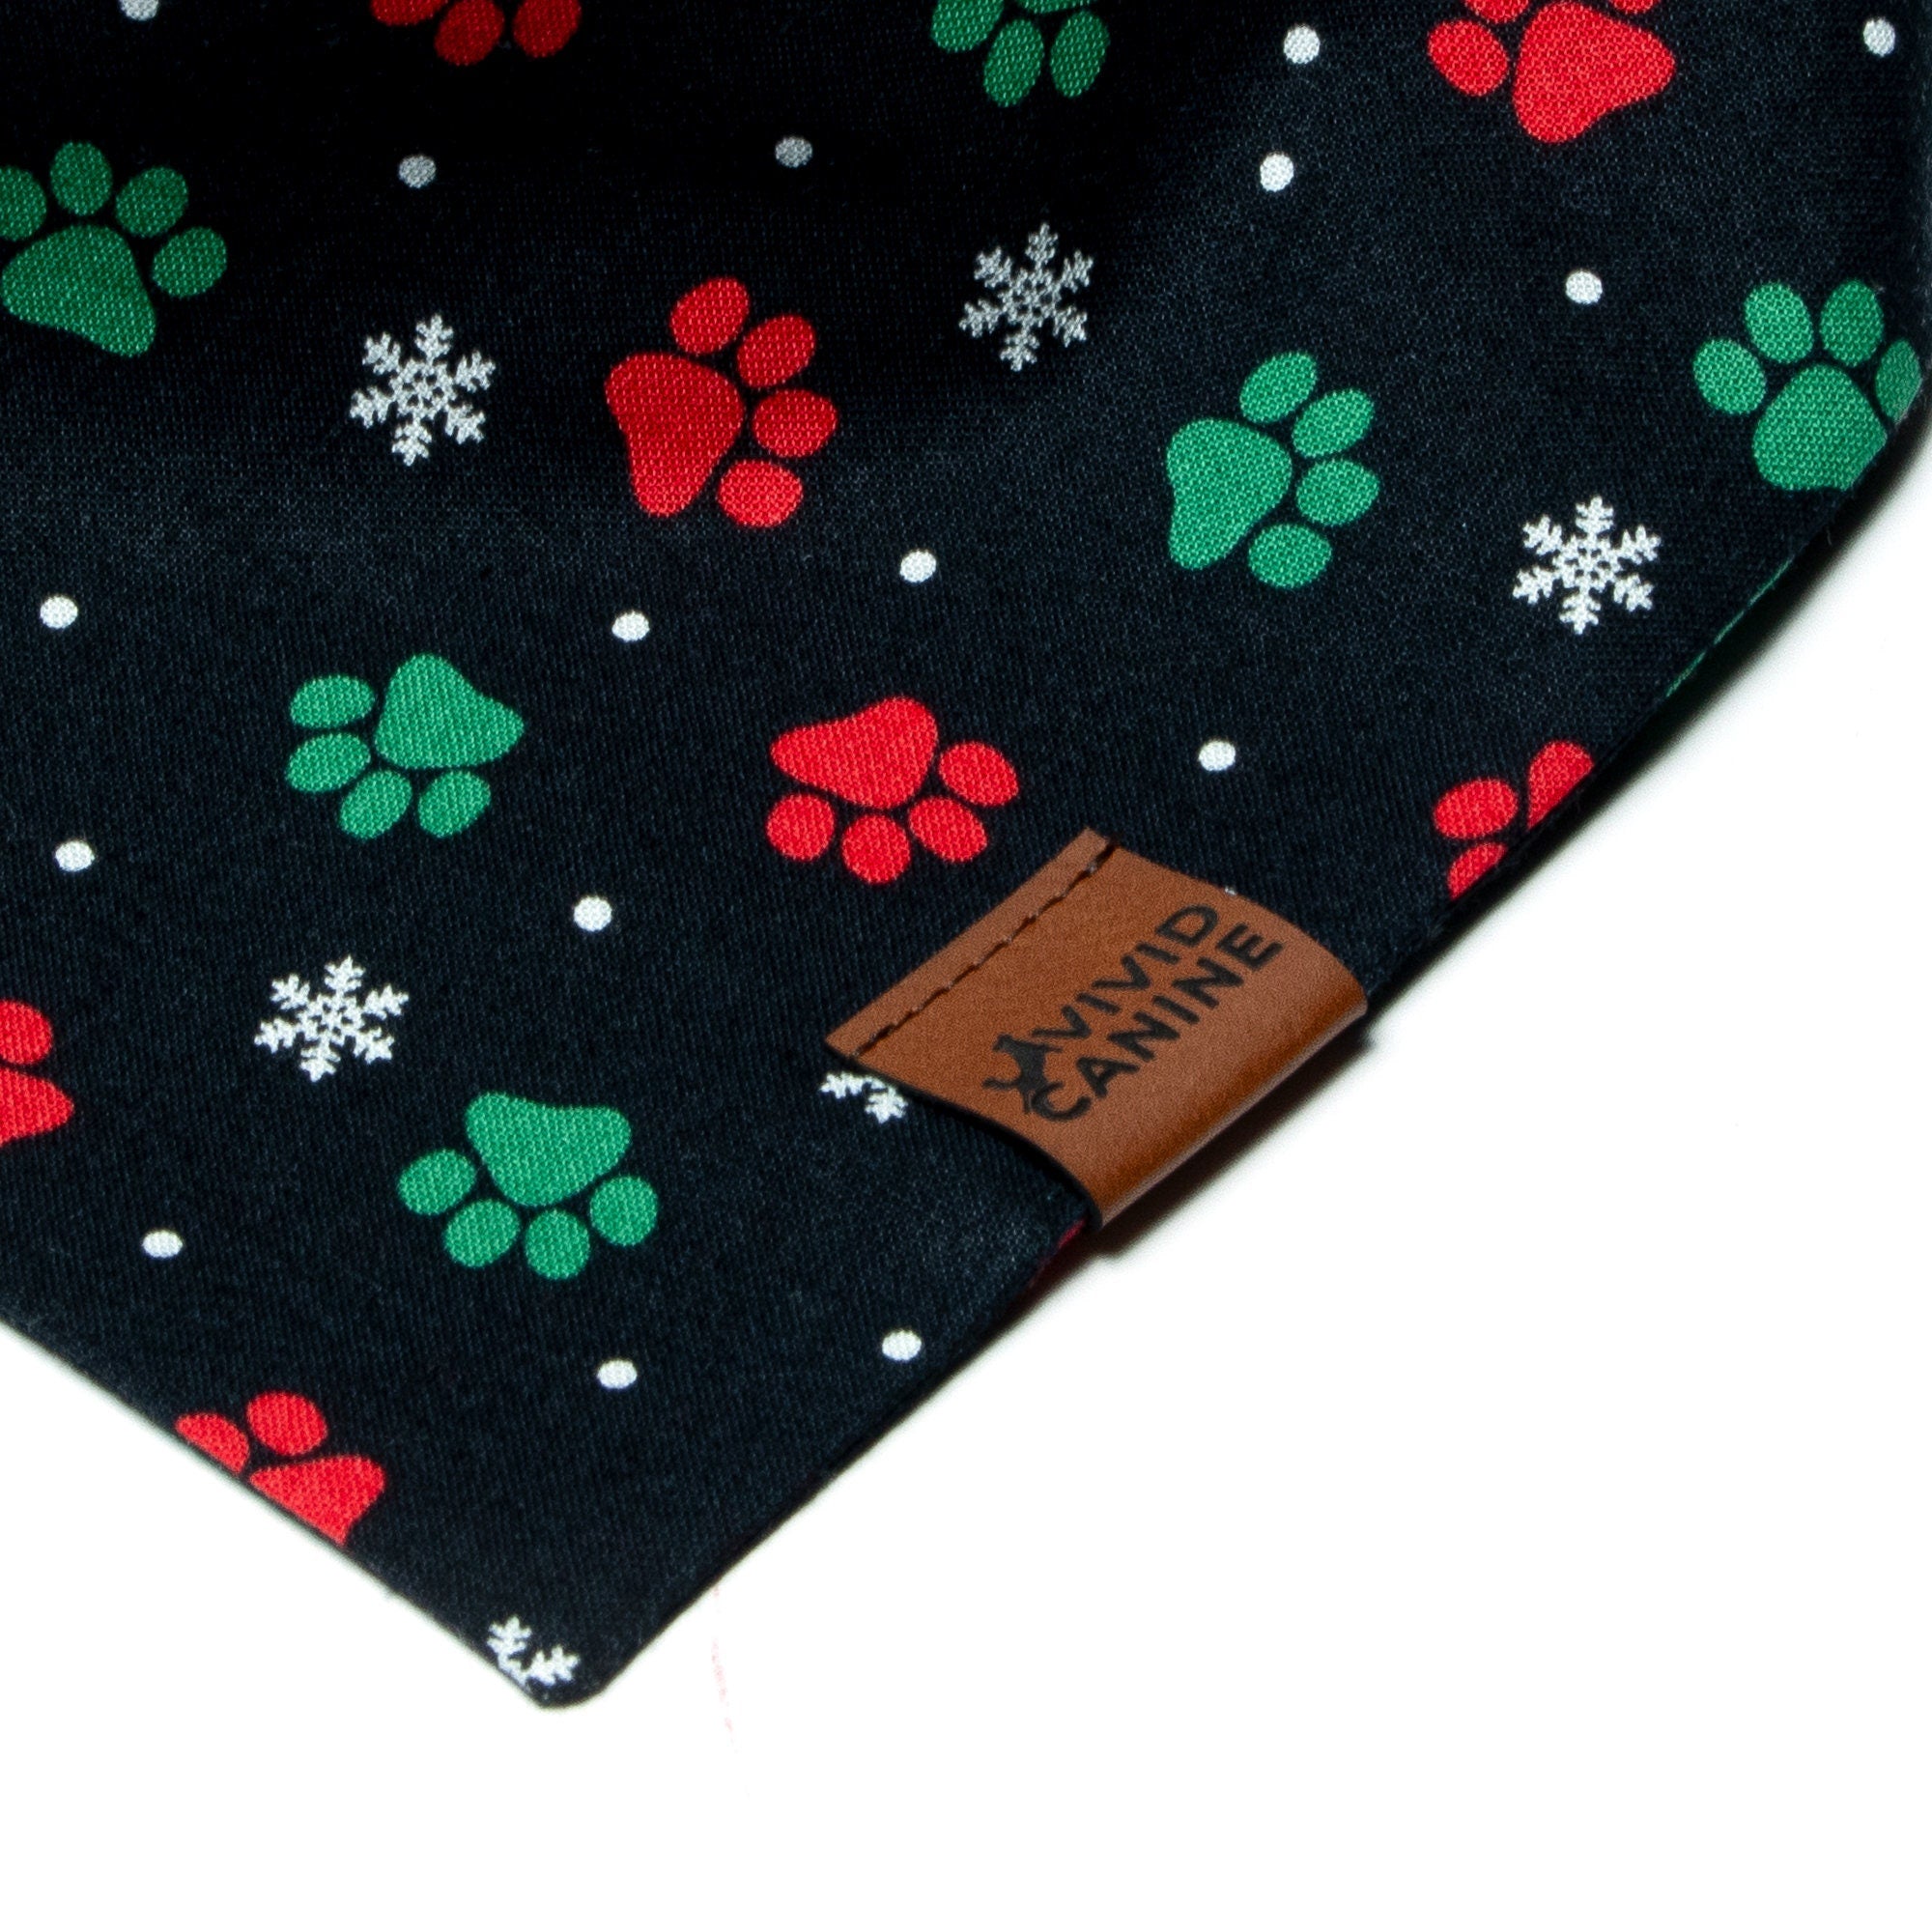 Christmas dog bandana with red and green paw prints and a vivid canine label